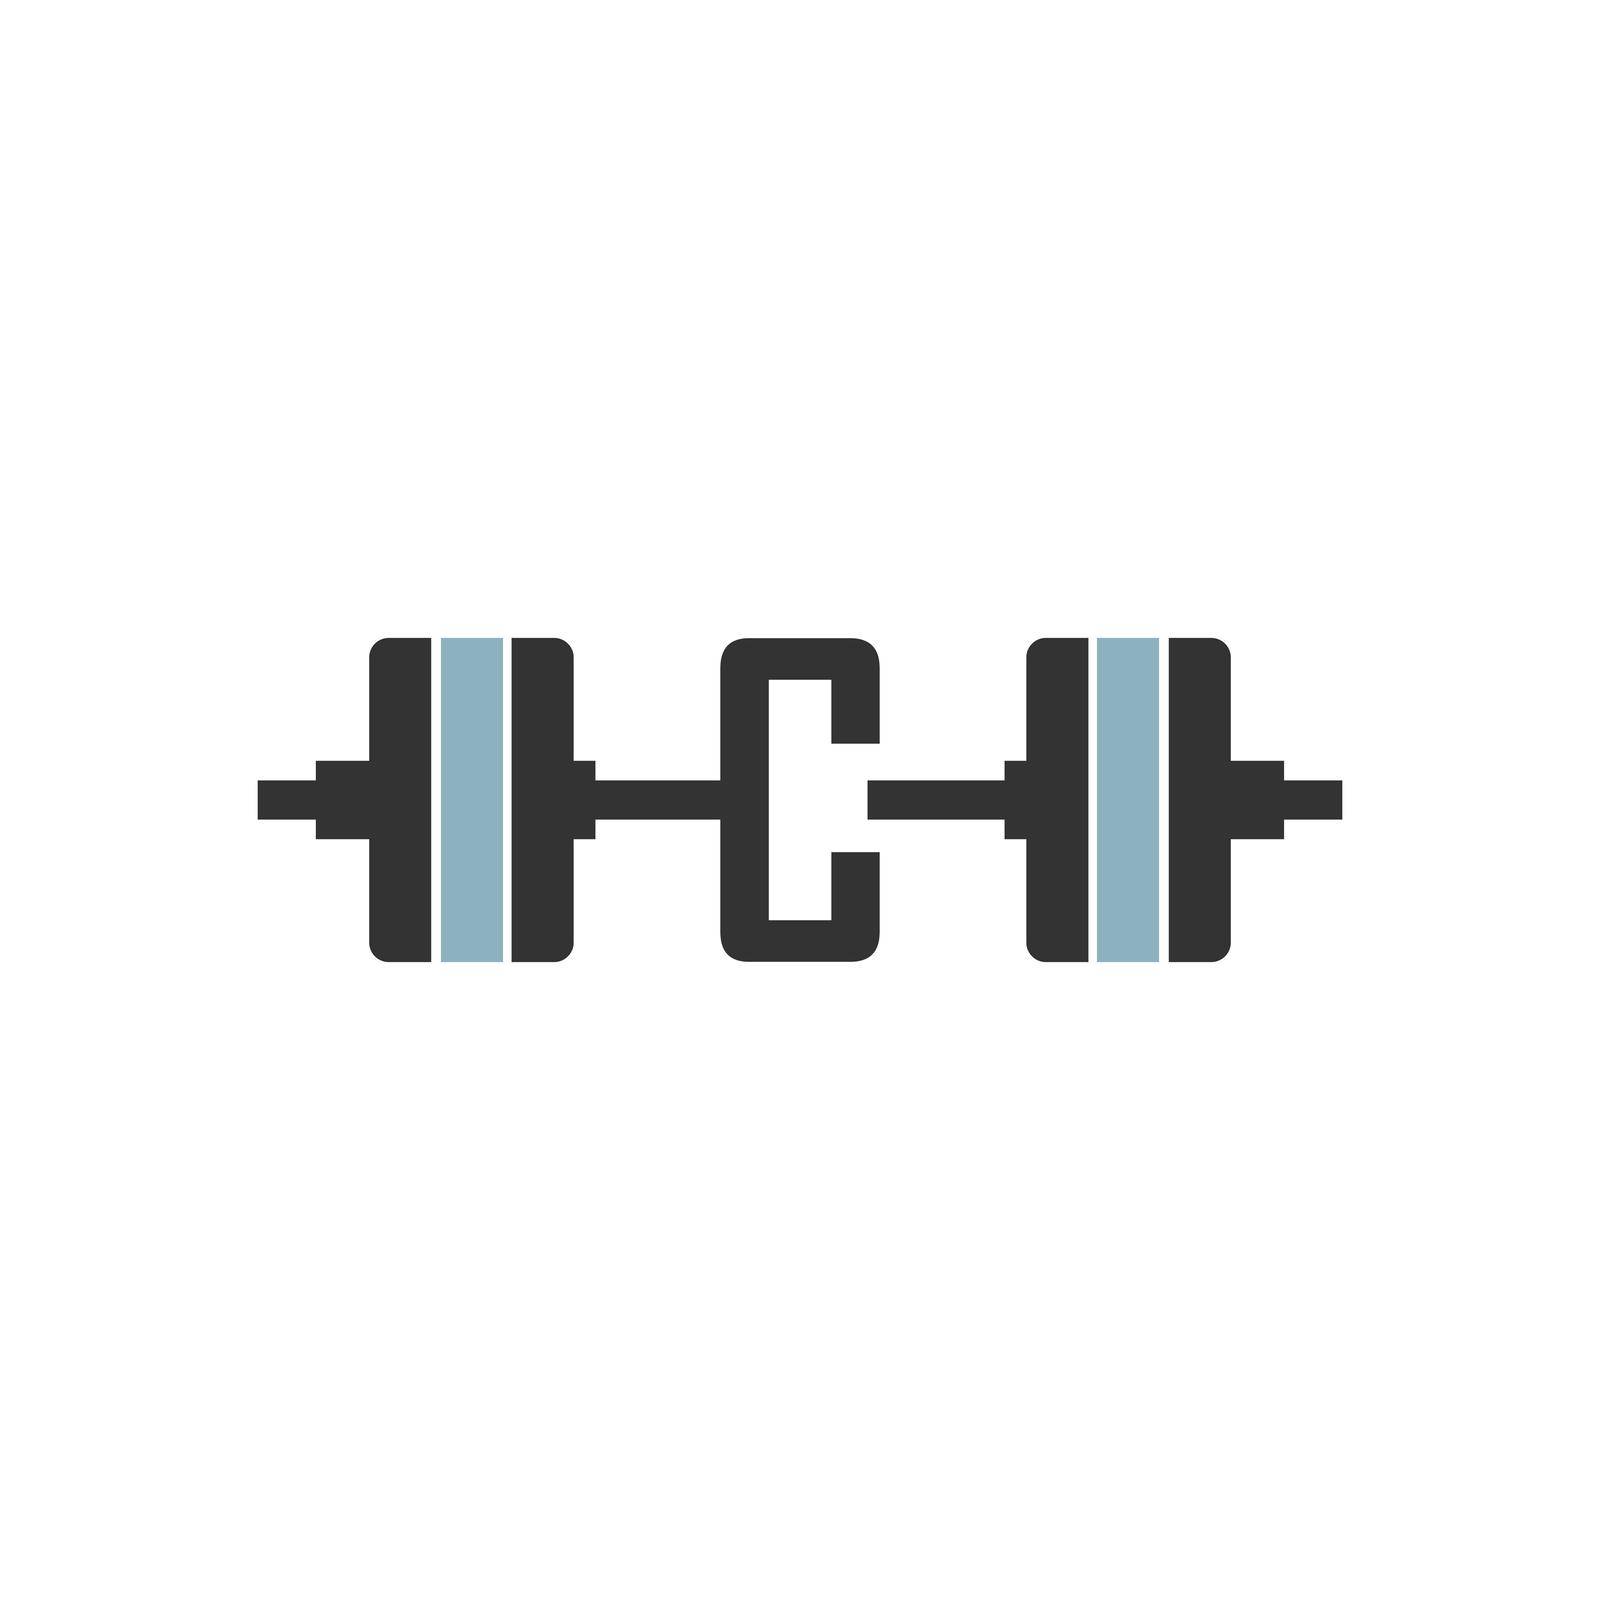 Letter C with barbell icon fitness design template vector